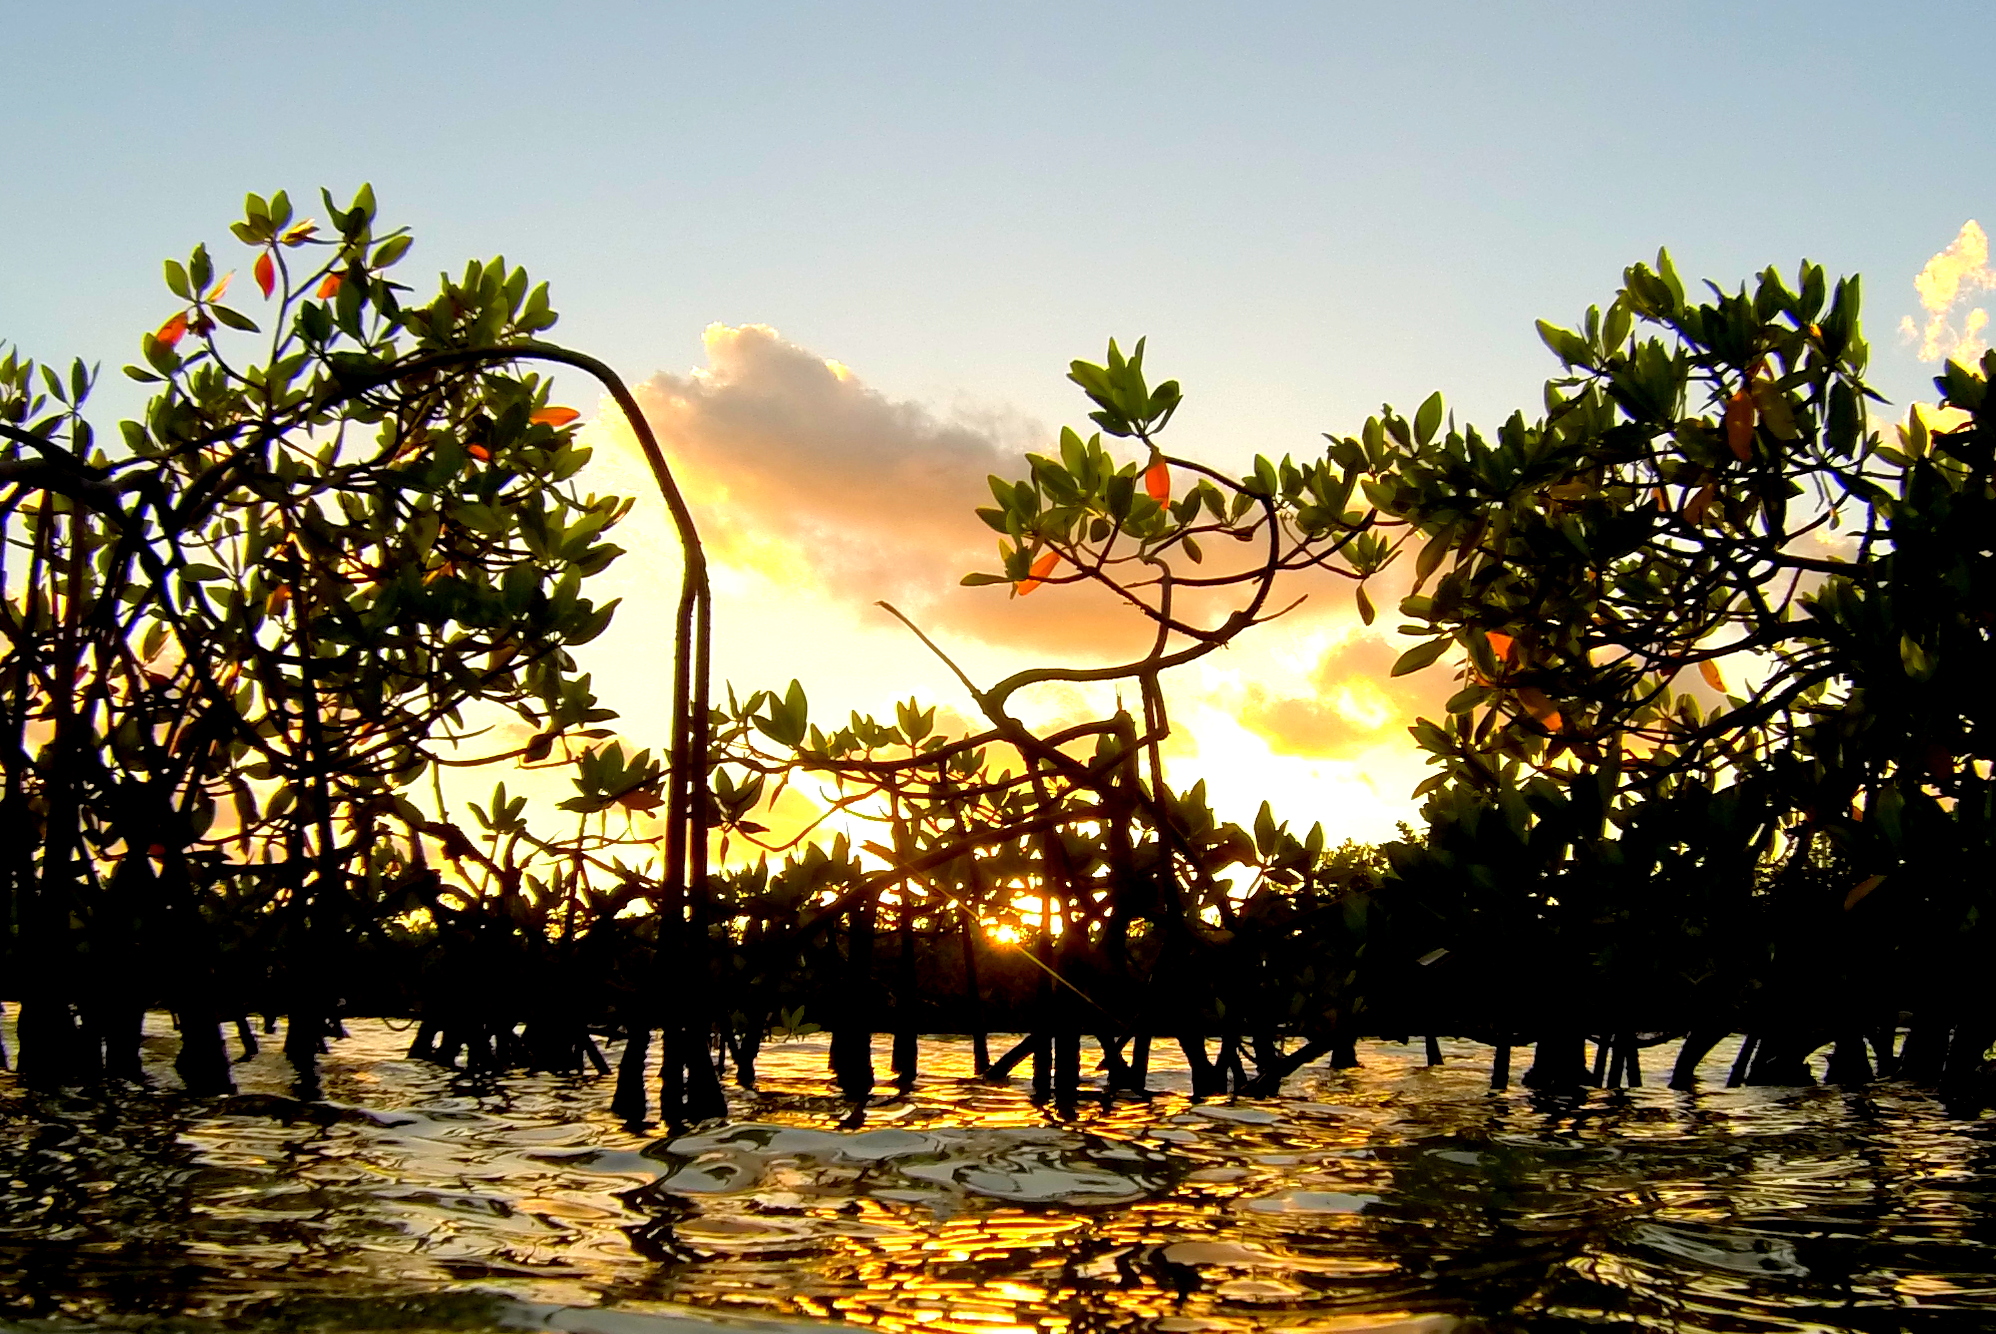 this picture is taken at water level with the sun setting through some mangrove leaves